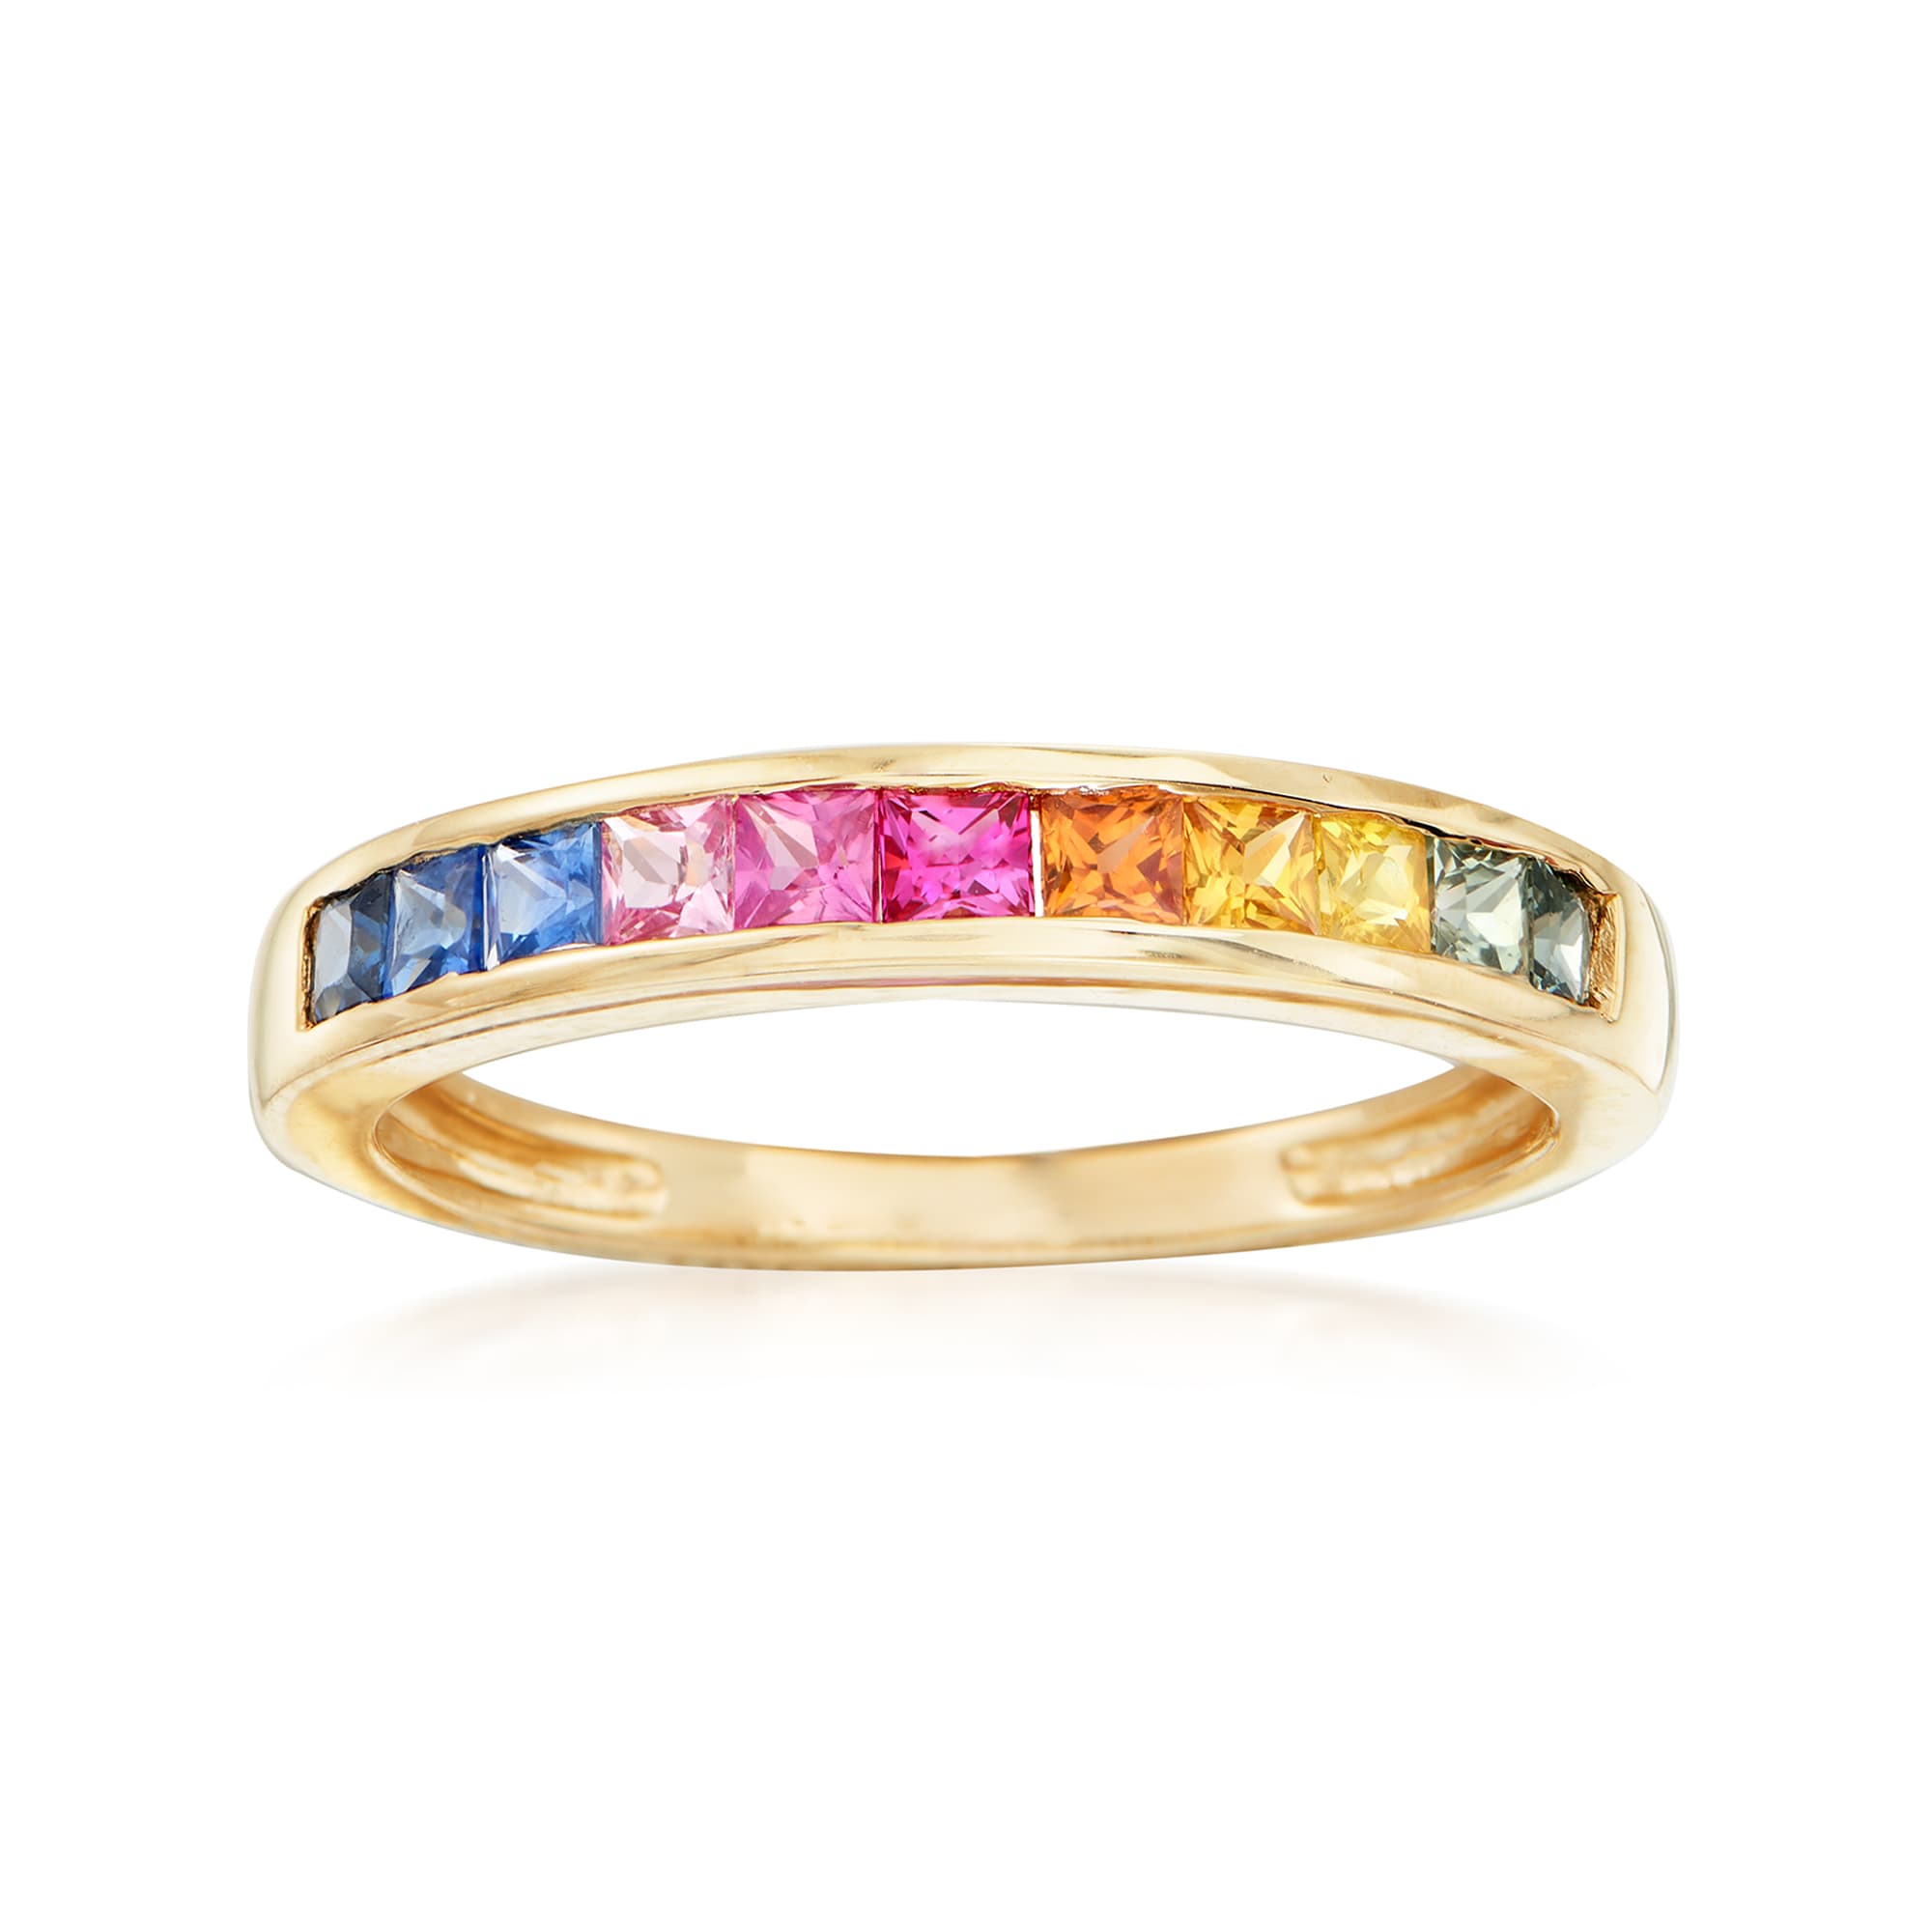 .95 ct. t.w. Multicolored Sapphire Ring in 14kt Yellow Gold | Ross-Simons